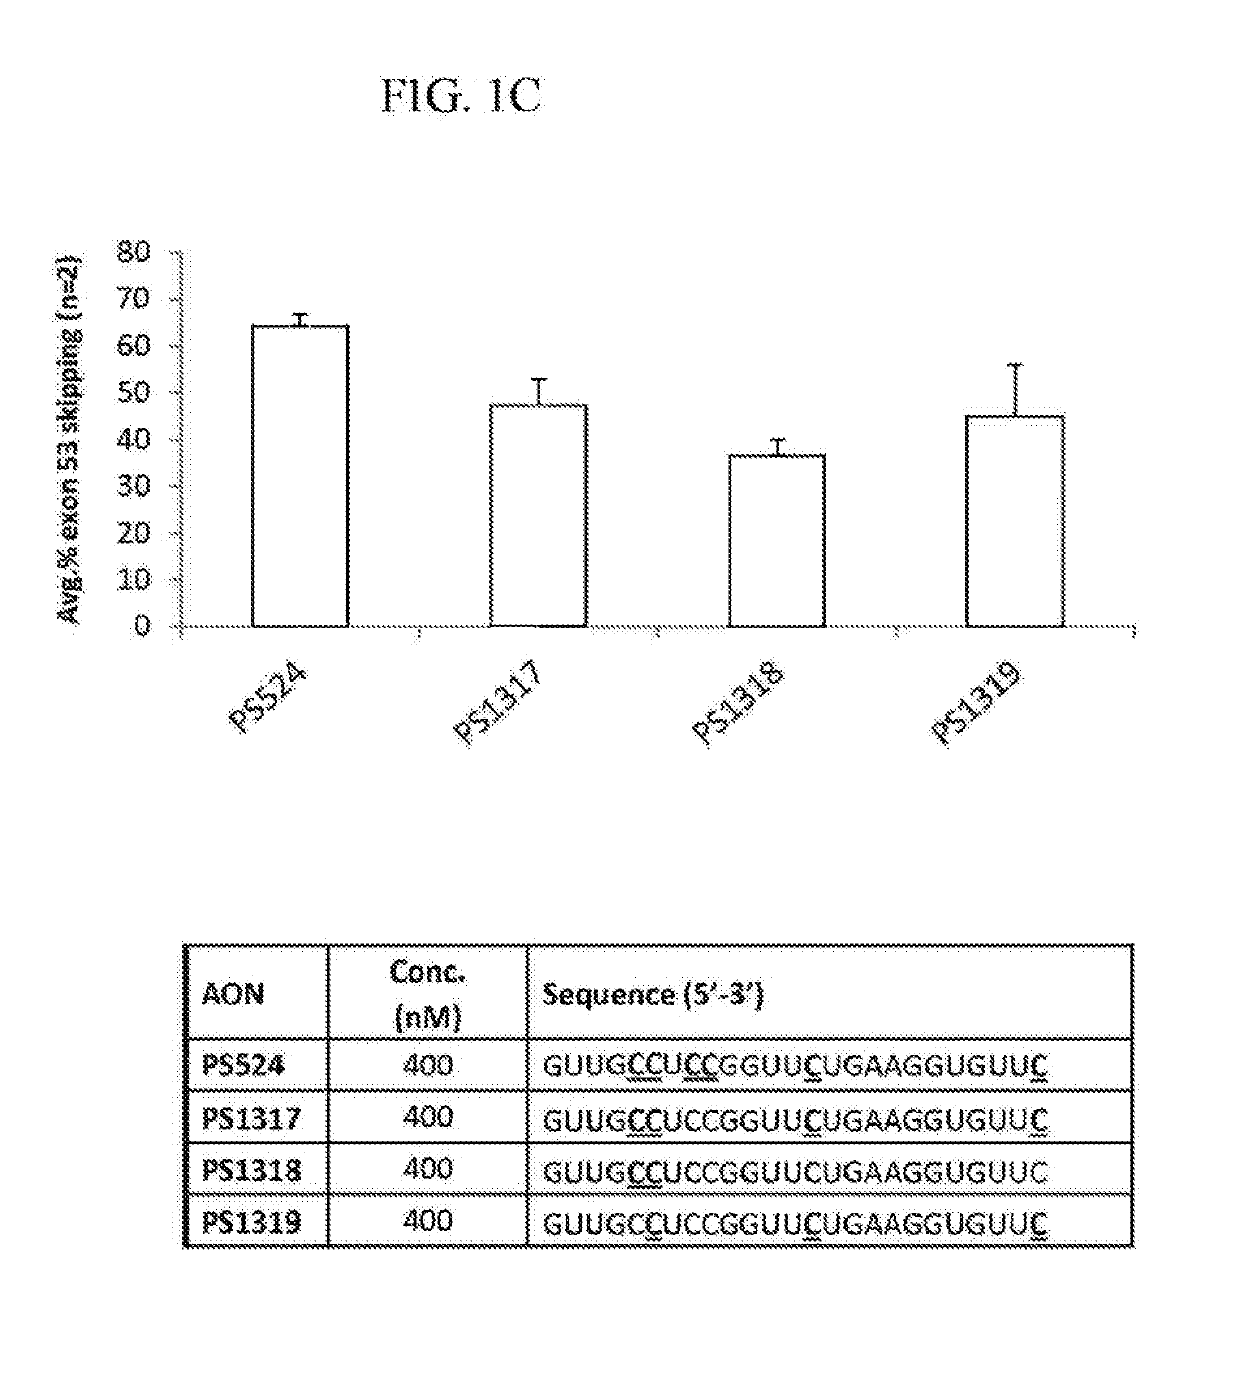 RNA Modulating Oligonucleotides with Improved Characteristics for the Treatment of Duchenne and Becker Muscular Dystrophy